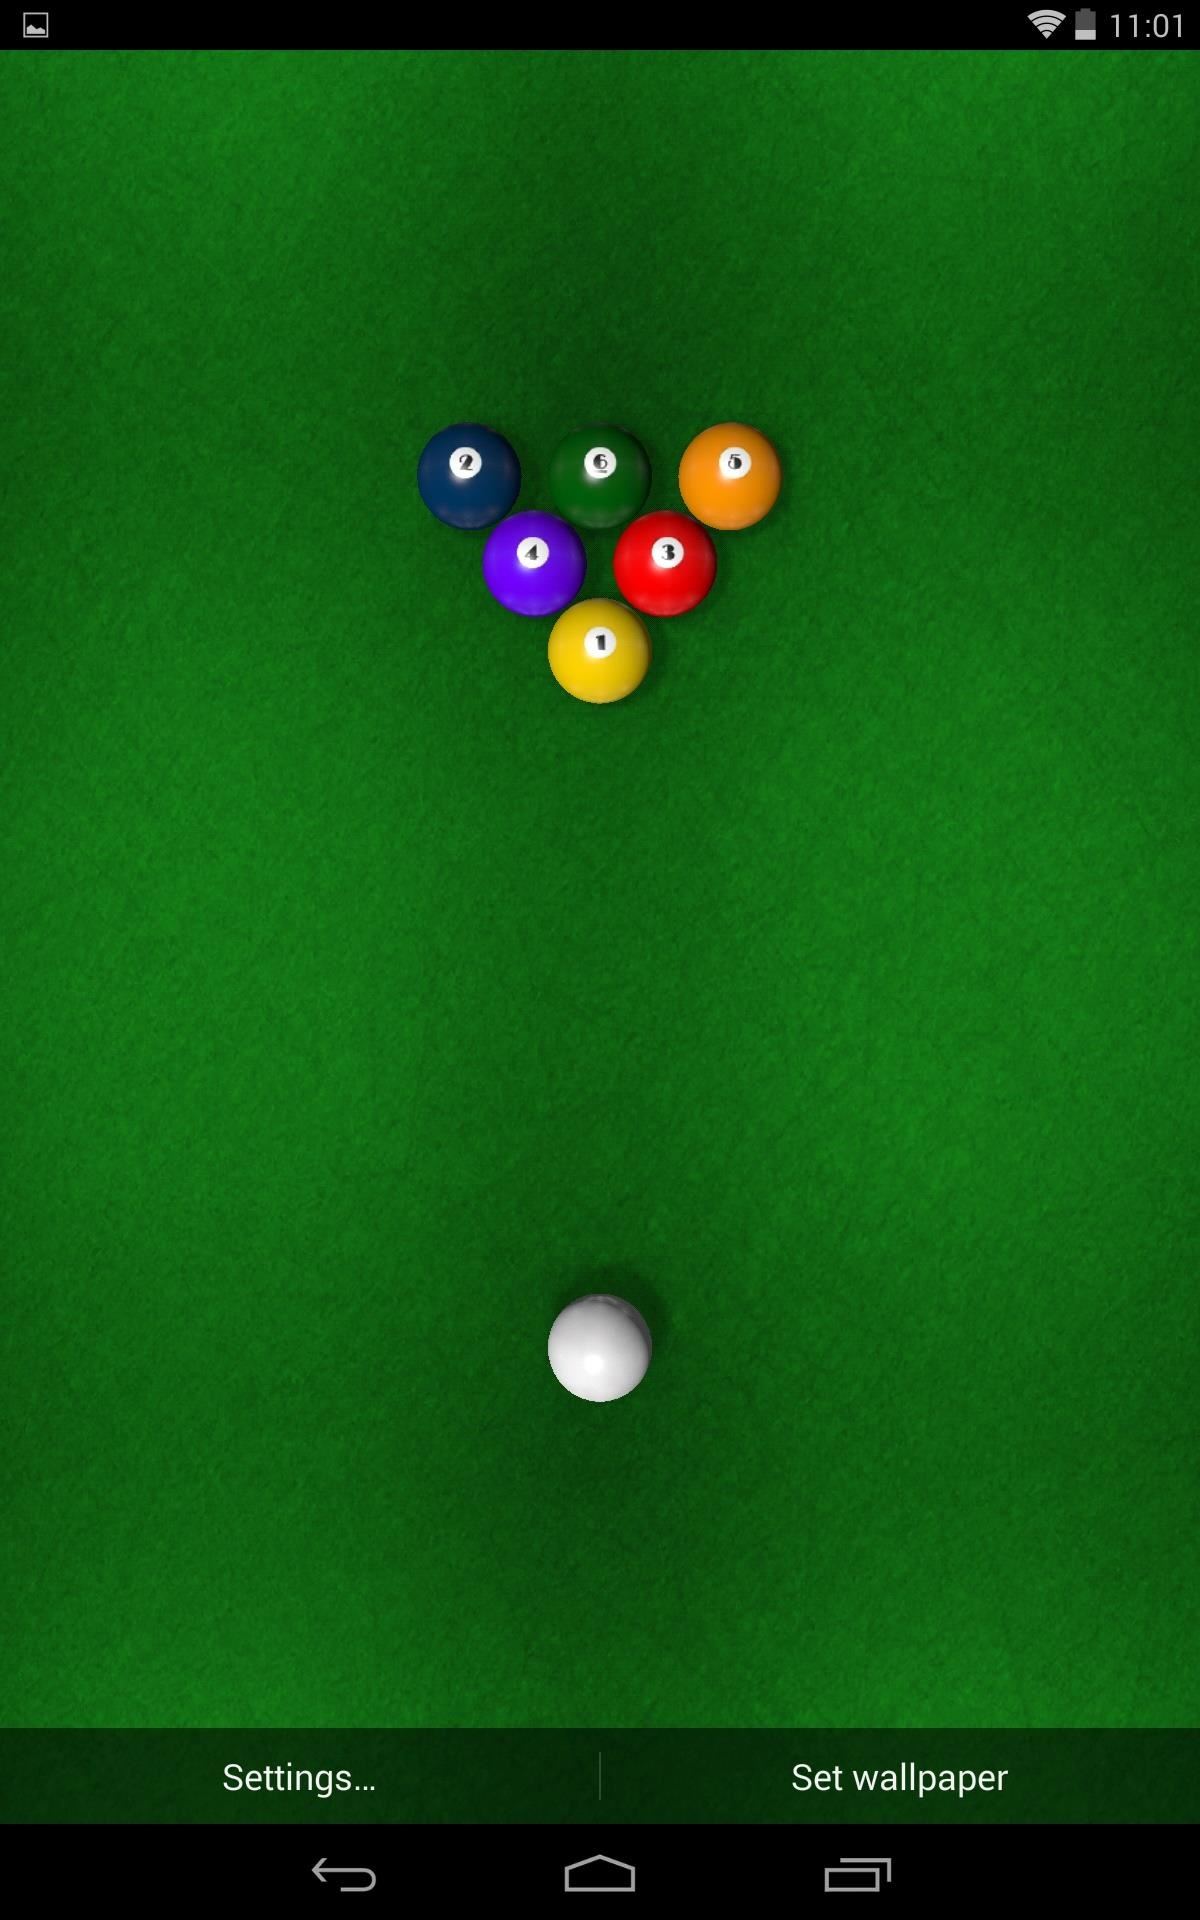 How To Play A Game Of Pool Directly On Your Android - Billiard Table - HD Wallpaper 